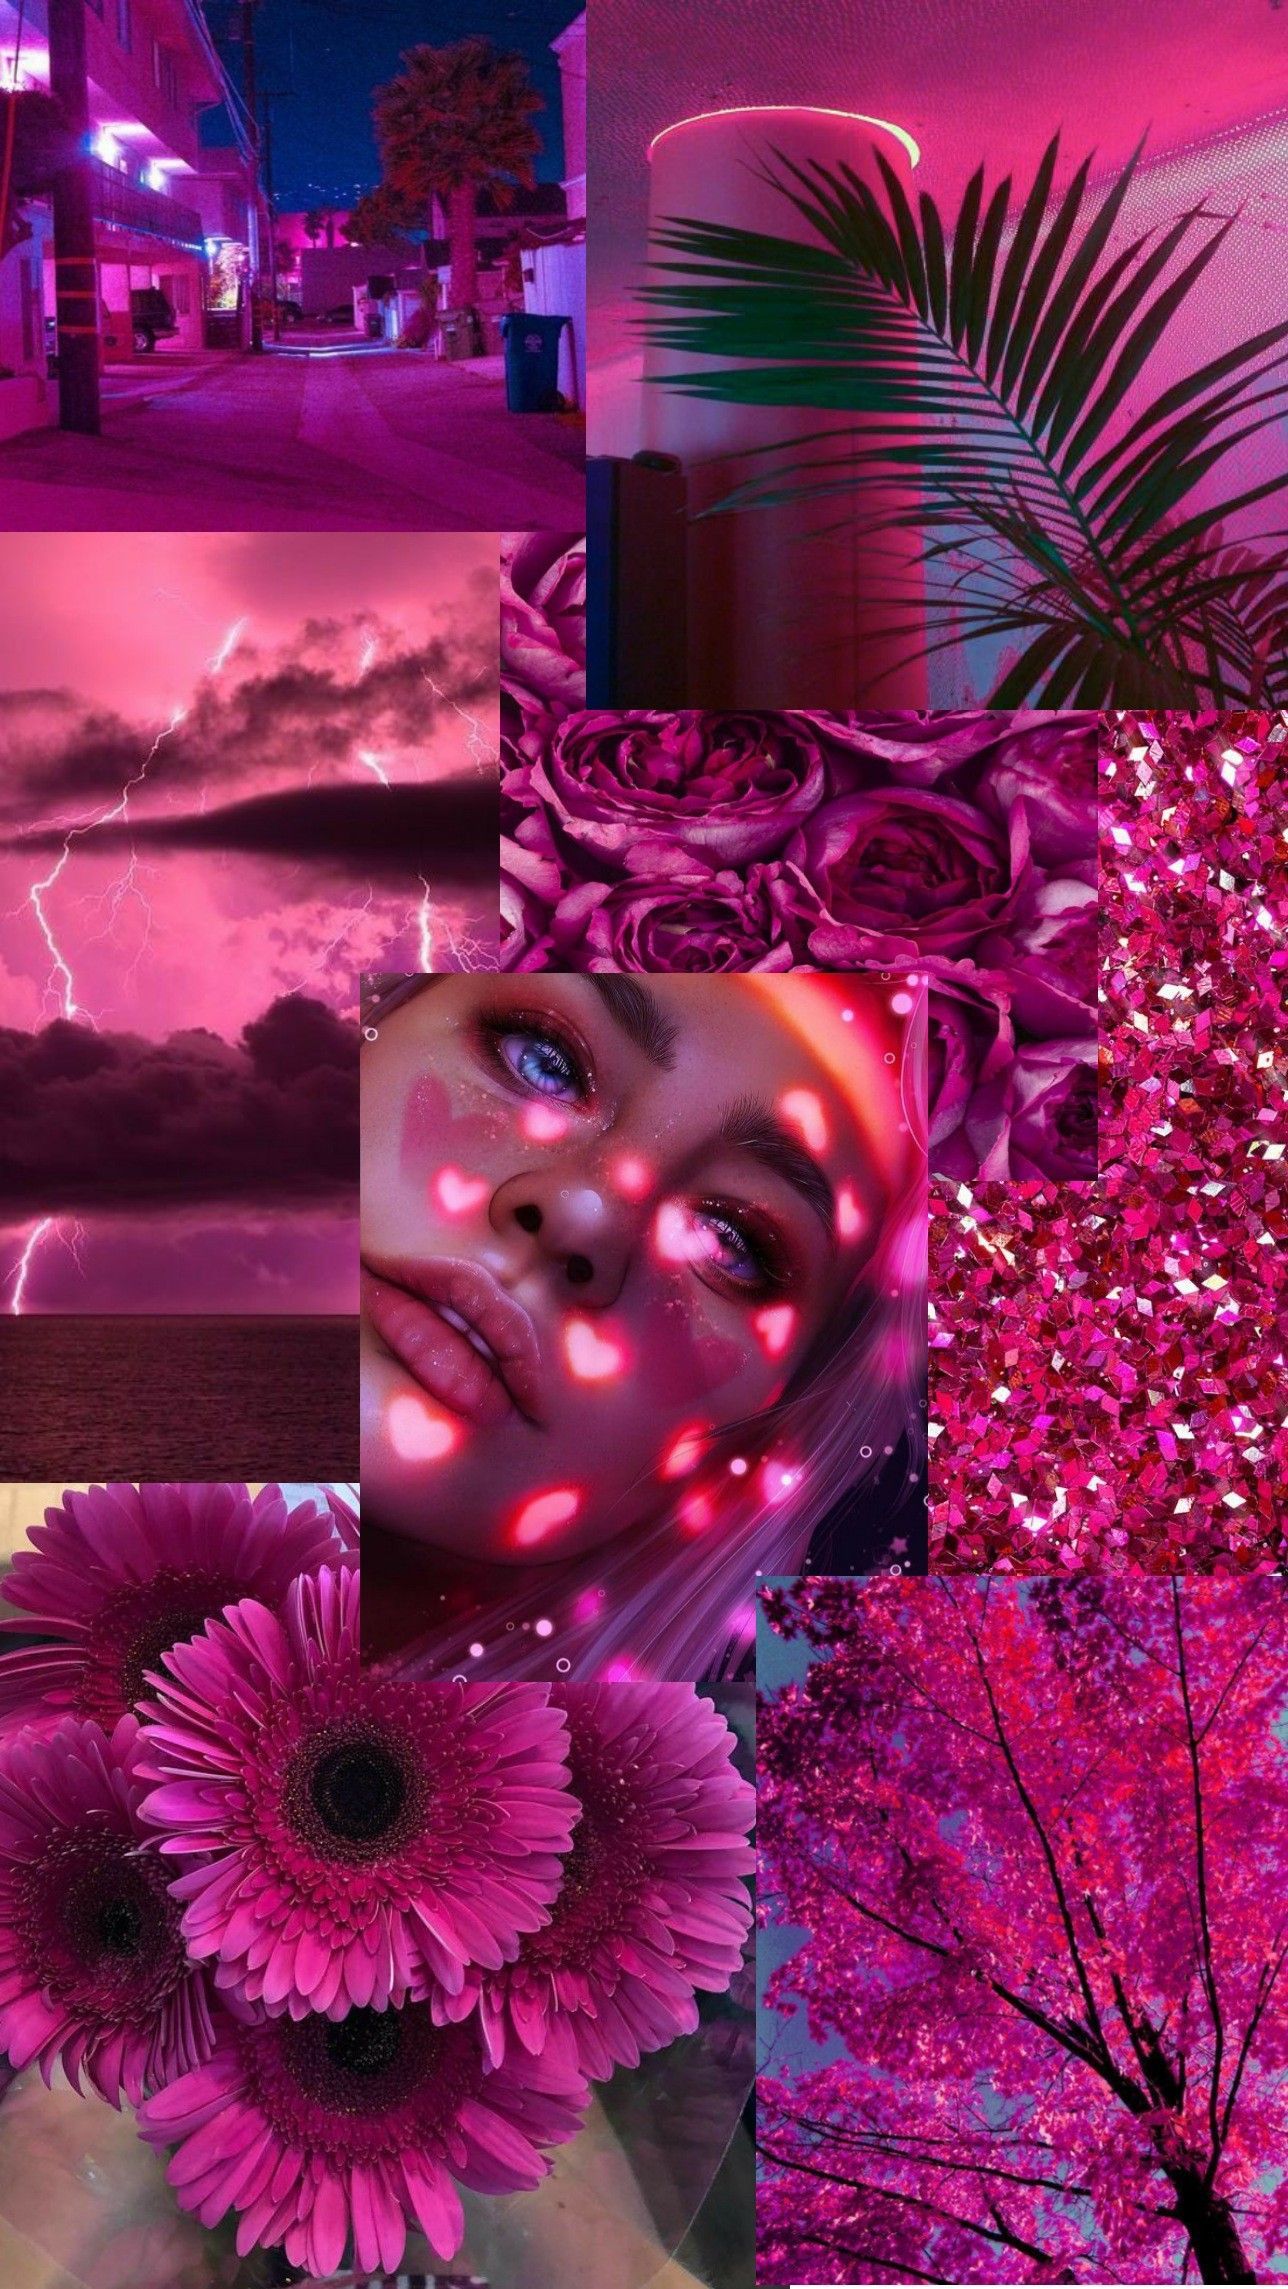 Aesthetic pink collage background with a girl, flowers, palm tree, lightning, and cherry blossoms - Magenta